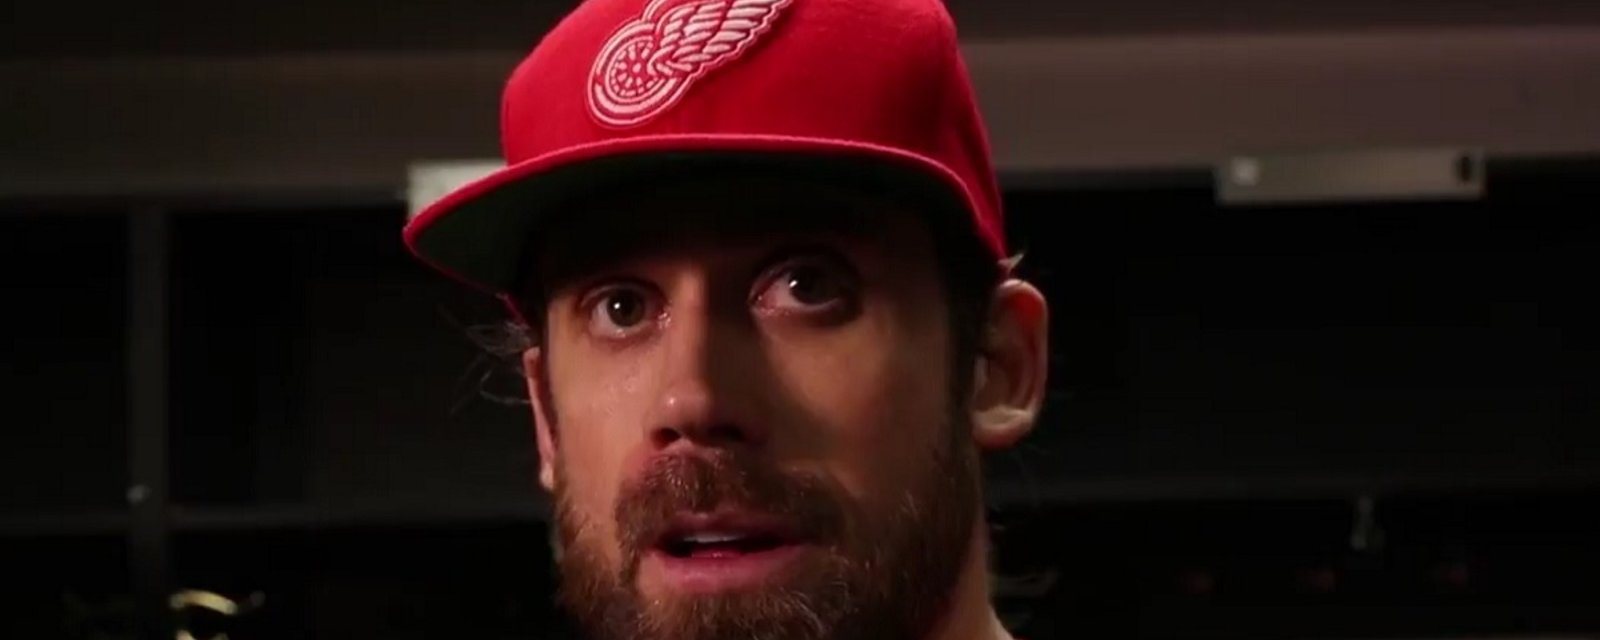 Breaking: An extremely emotional Zetterberg speaks to the media.